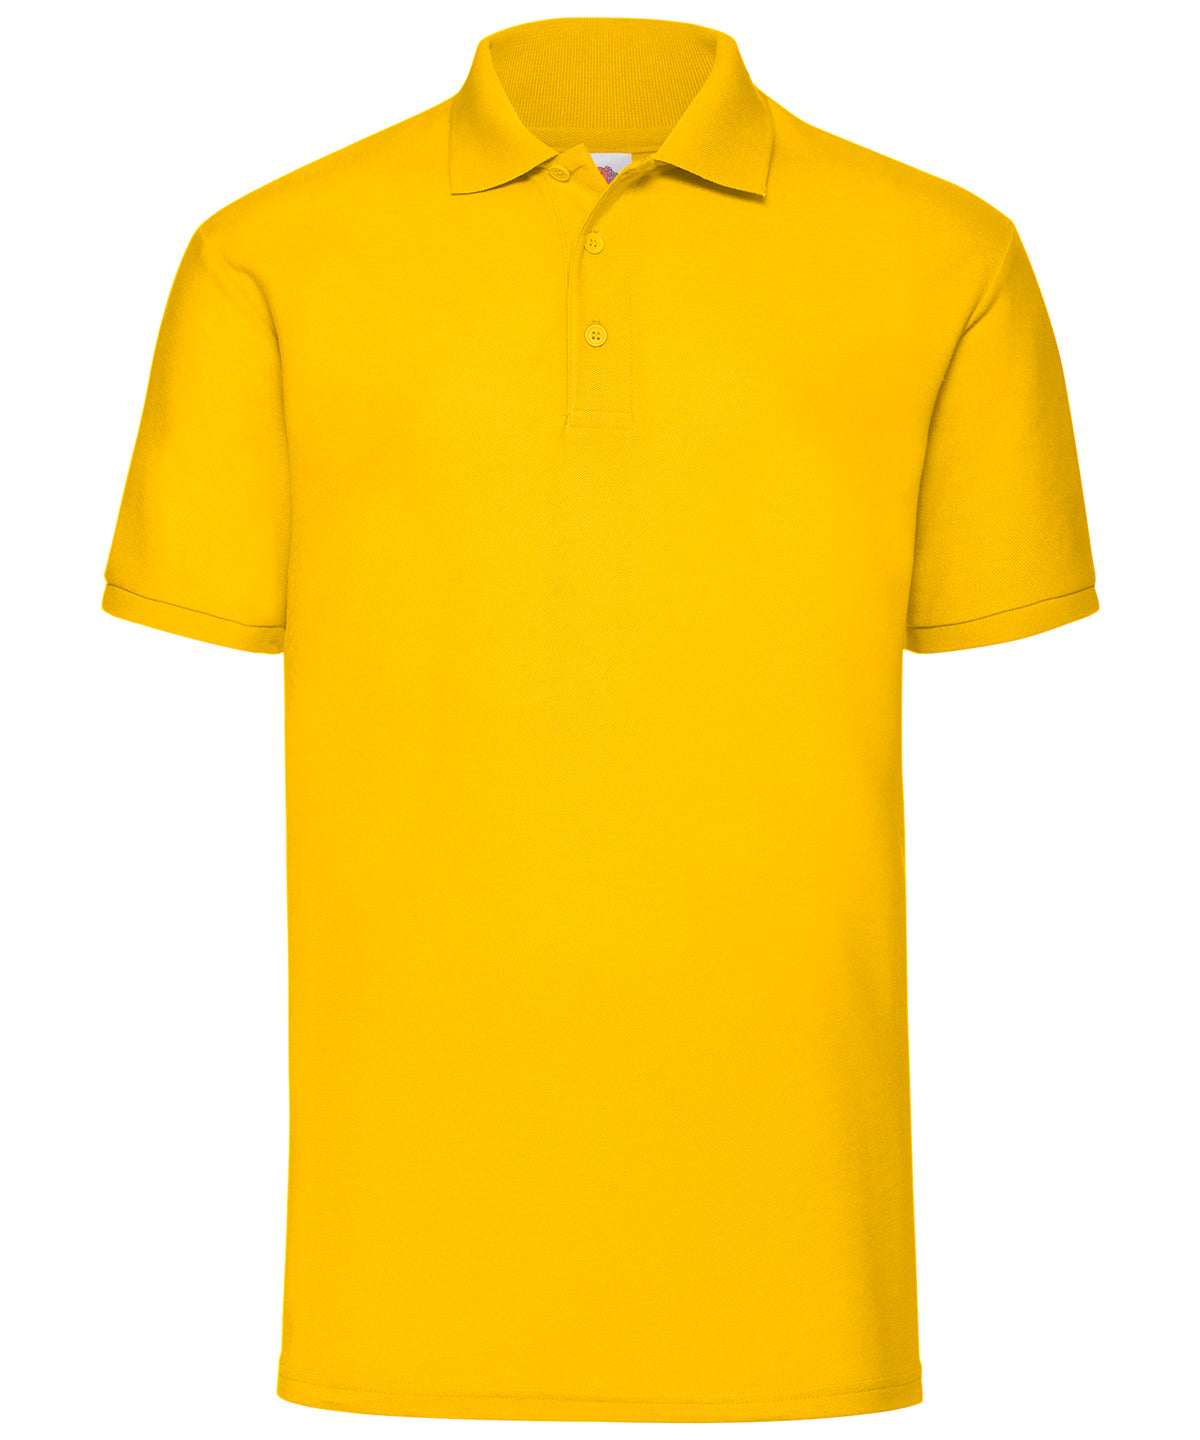 Personalised Polo Shirts - Mid Yellow Fruit of the Loom 65/35 Polo